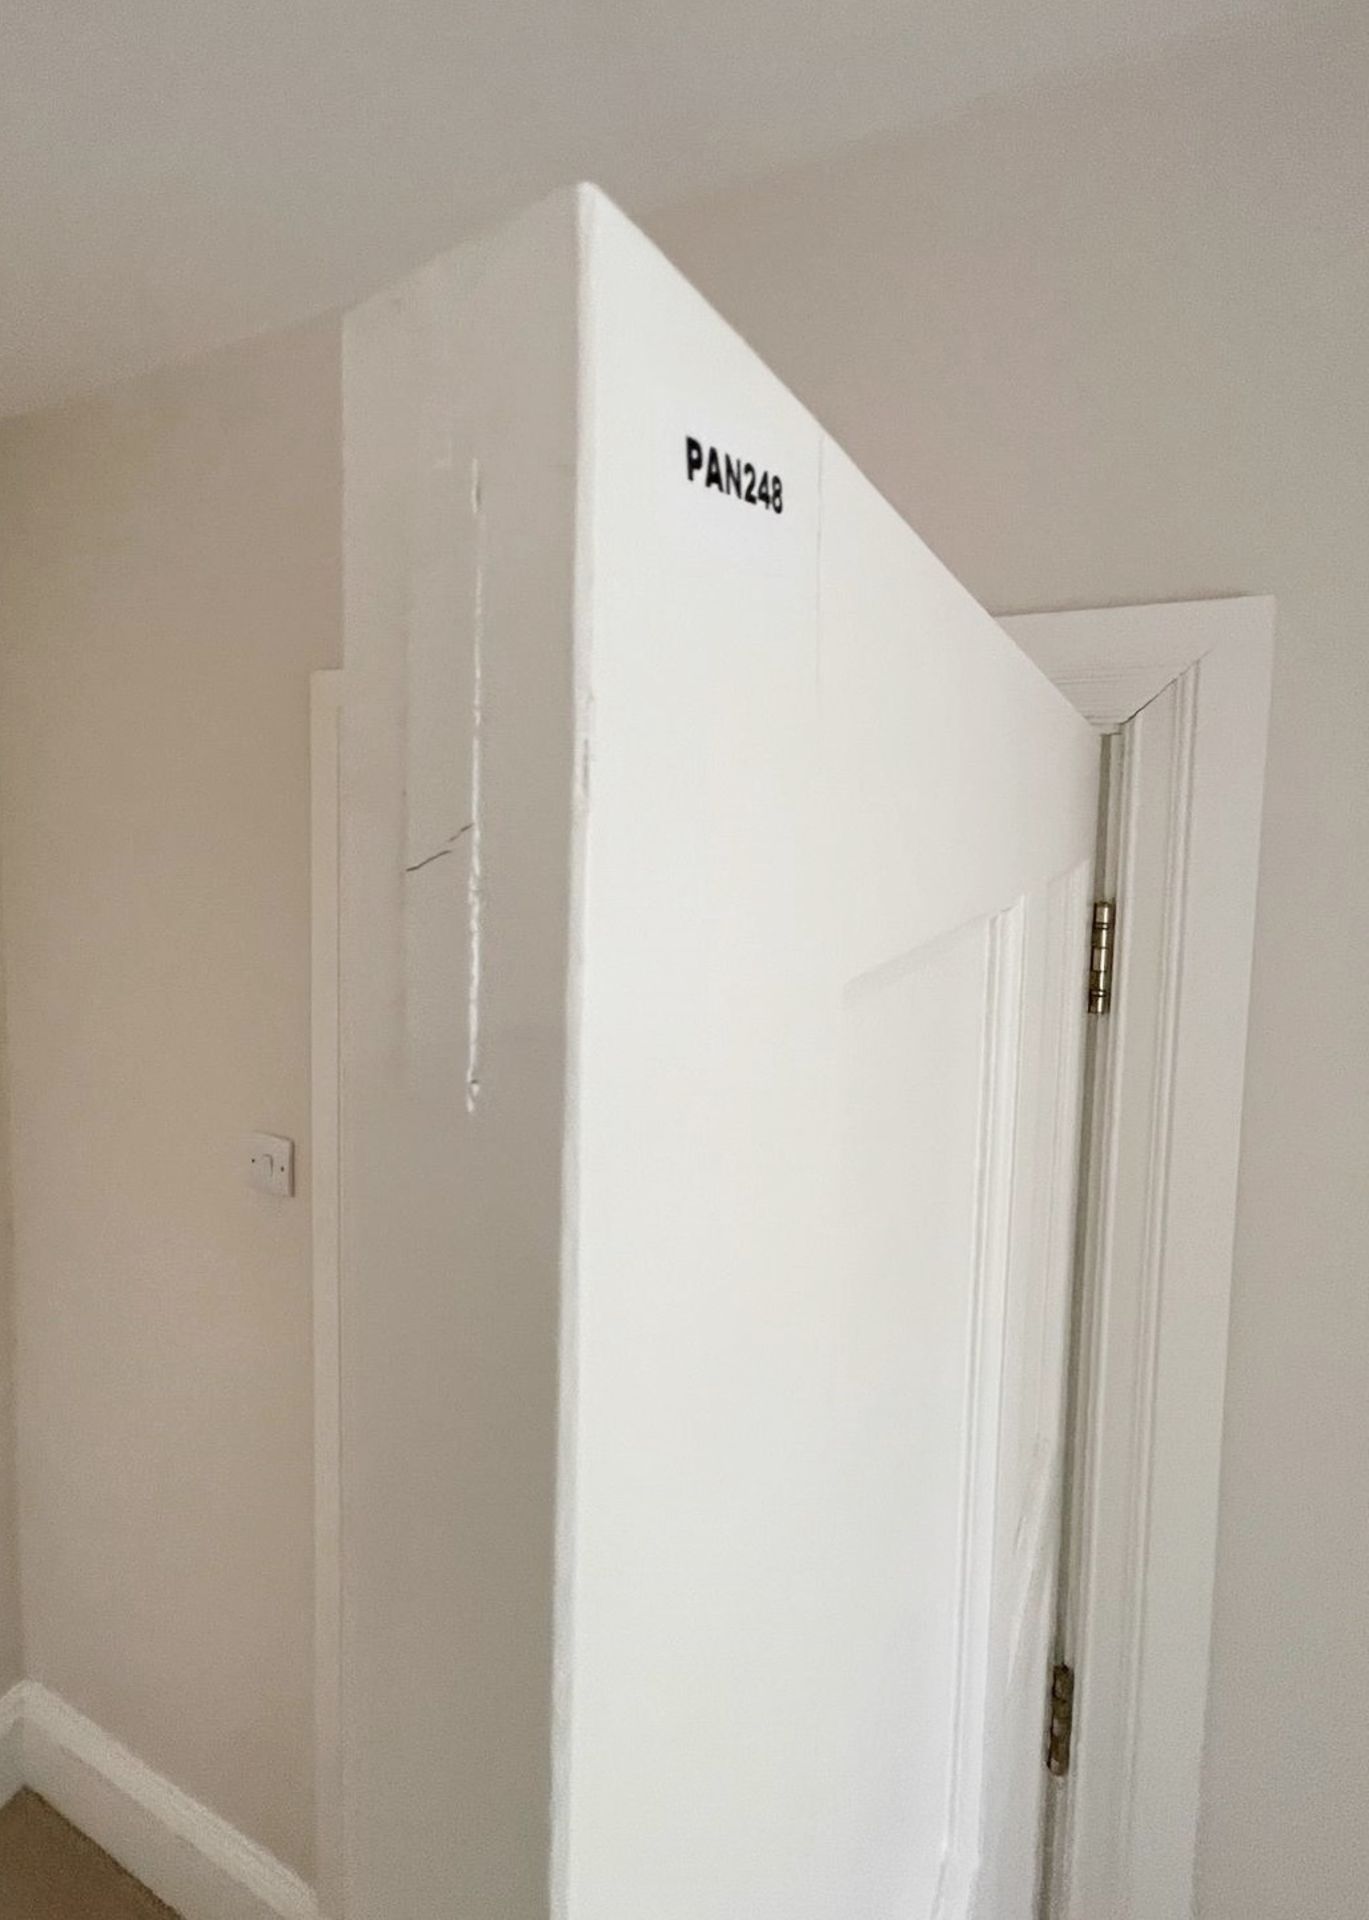 1 x Solid Wood Lockable Painted  Internal Door in White - Includes Handles and Hinges - Ref: - Image 9 of 14